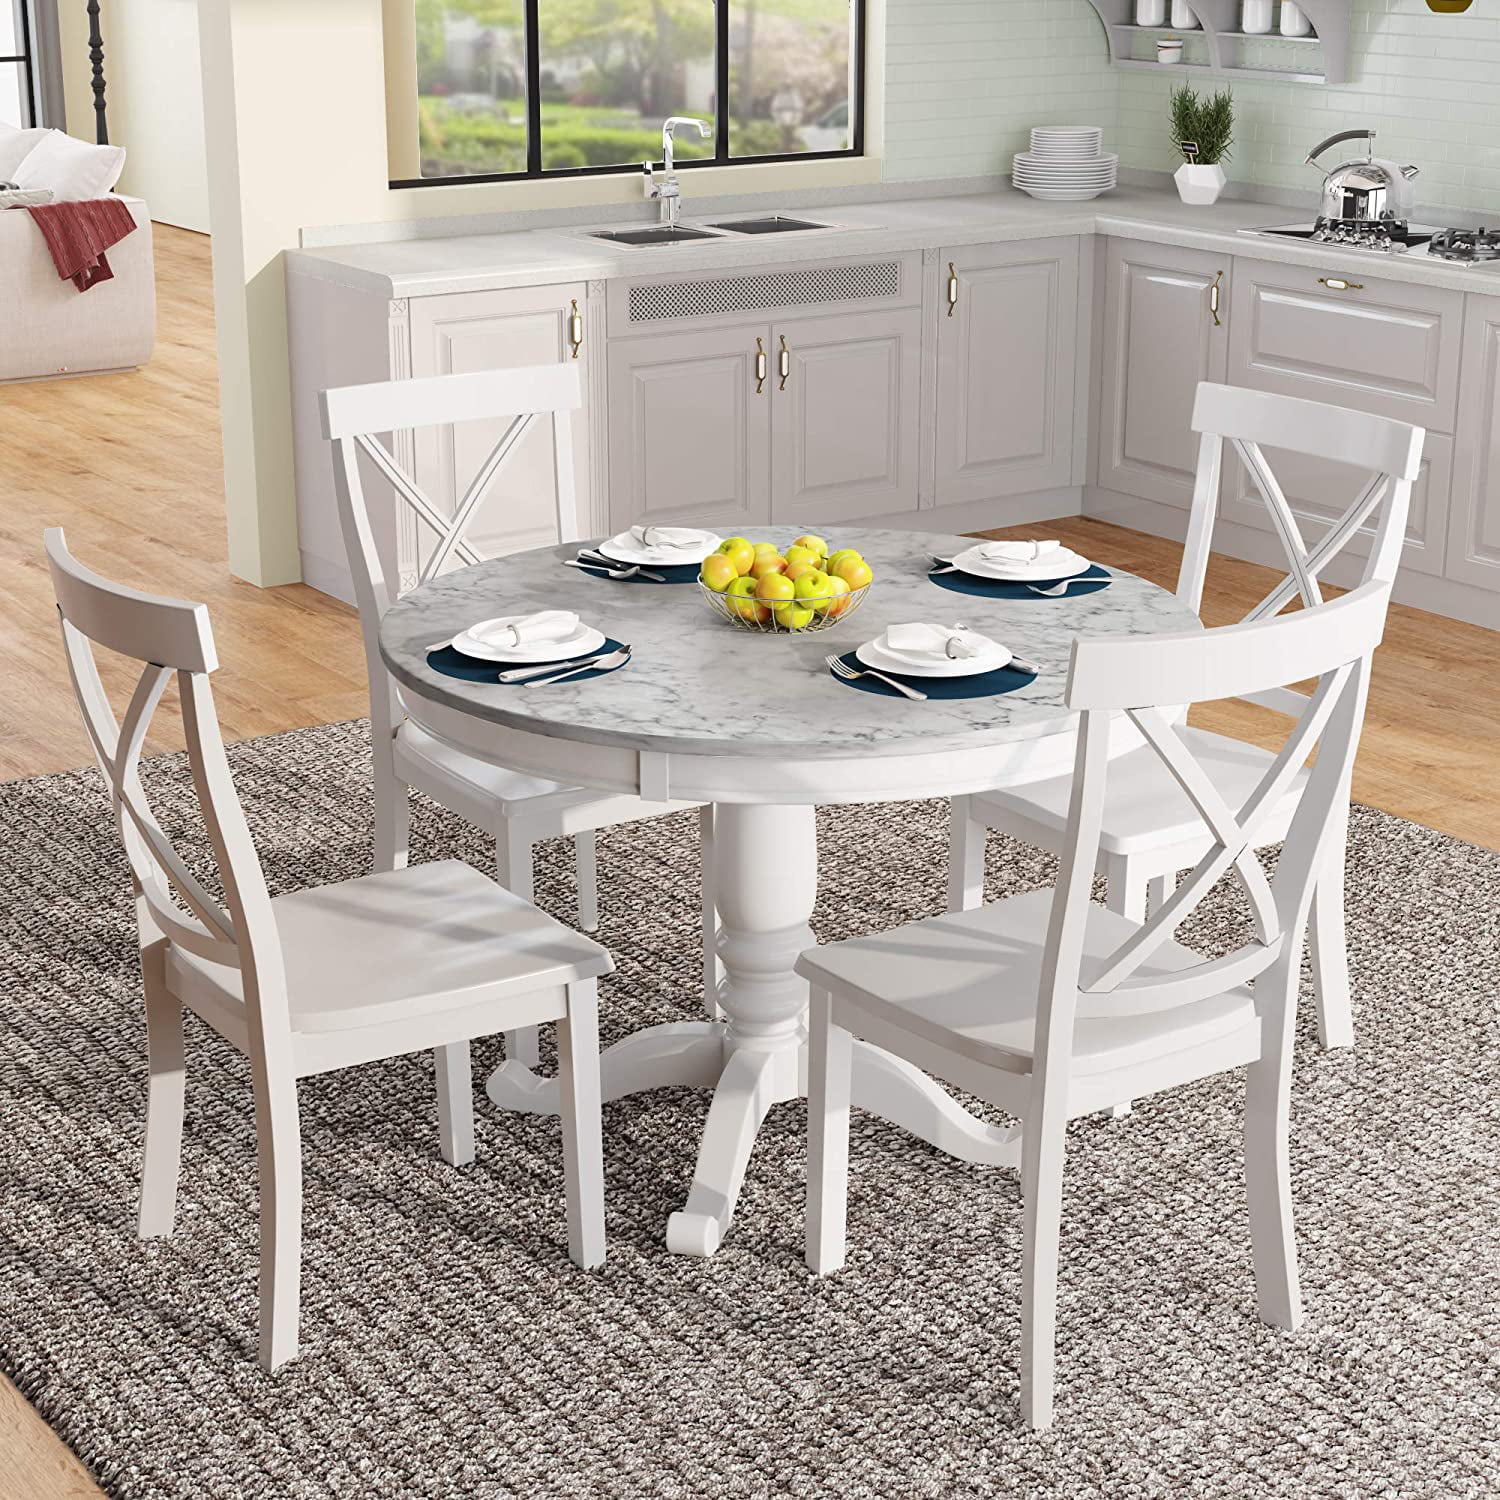 5 Piece Dining Set Wood Round Kitchen, Small Round White Dining Table Set